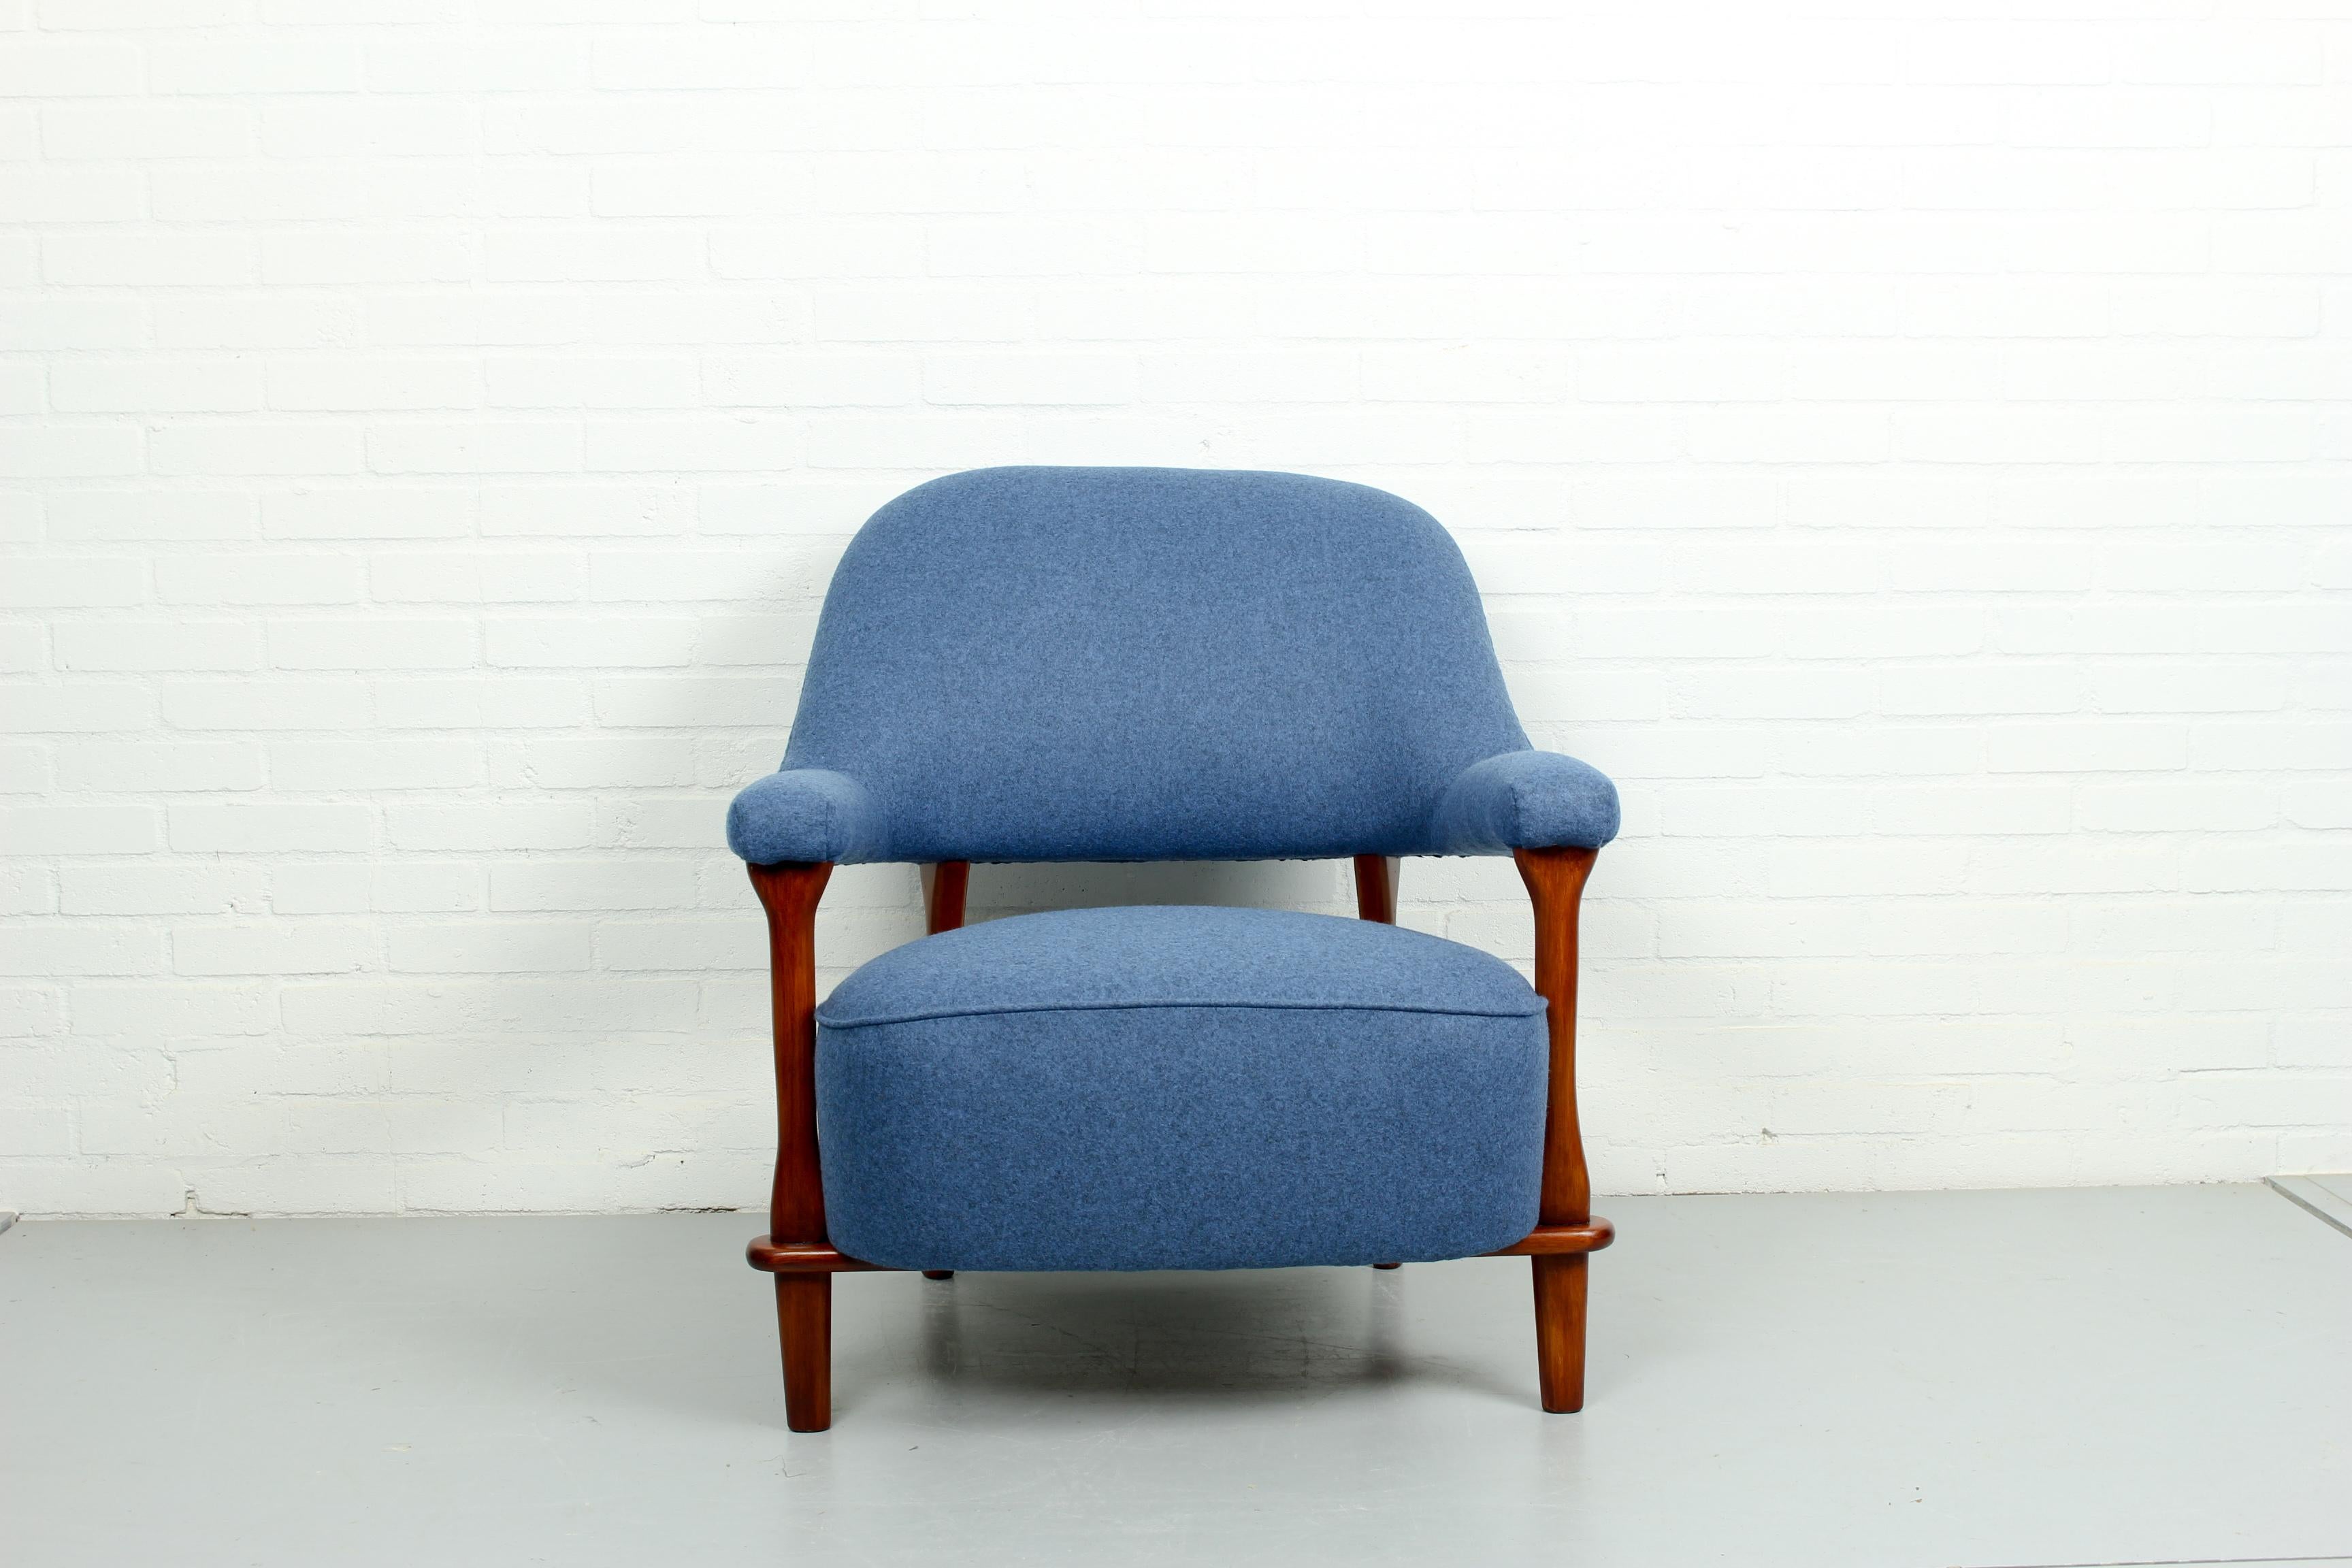 This lounge chair was designed by the renowned Dutch designer Theo Ruth for Artifort. This armchair is one of his early progressive designs made in the 1950s. This lounge chair has been refurbished with a beautiful wool felt in a blue grey melange.